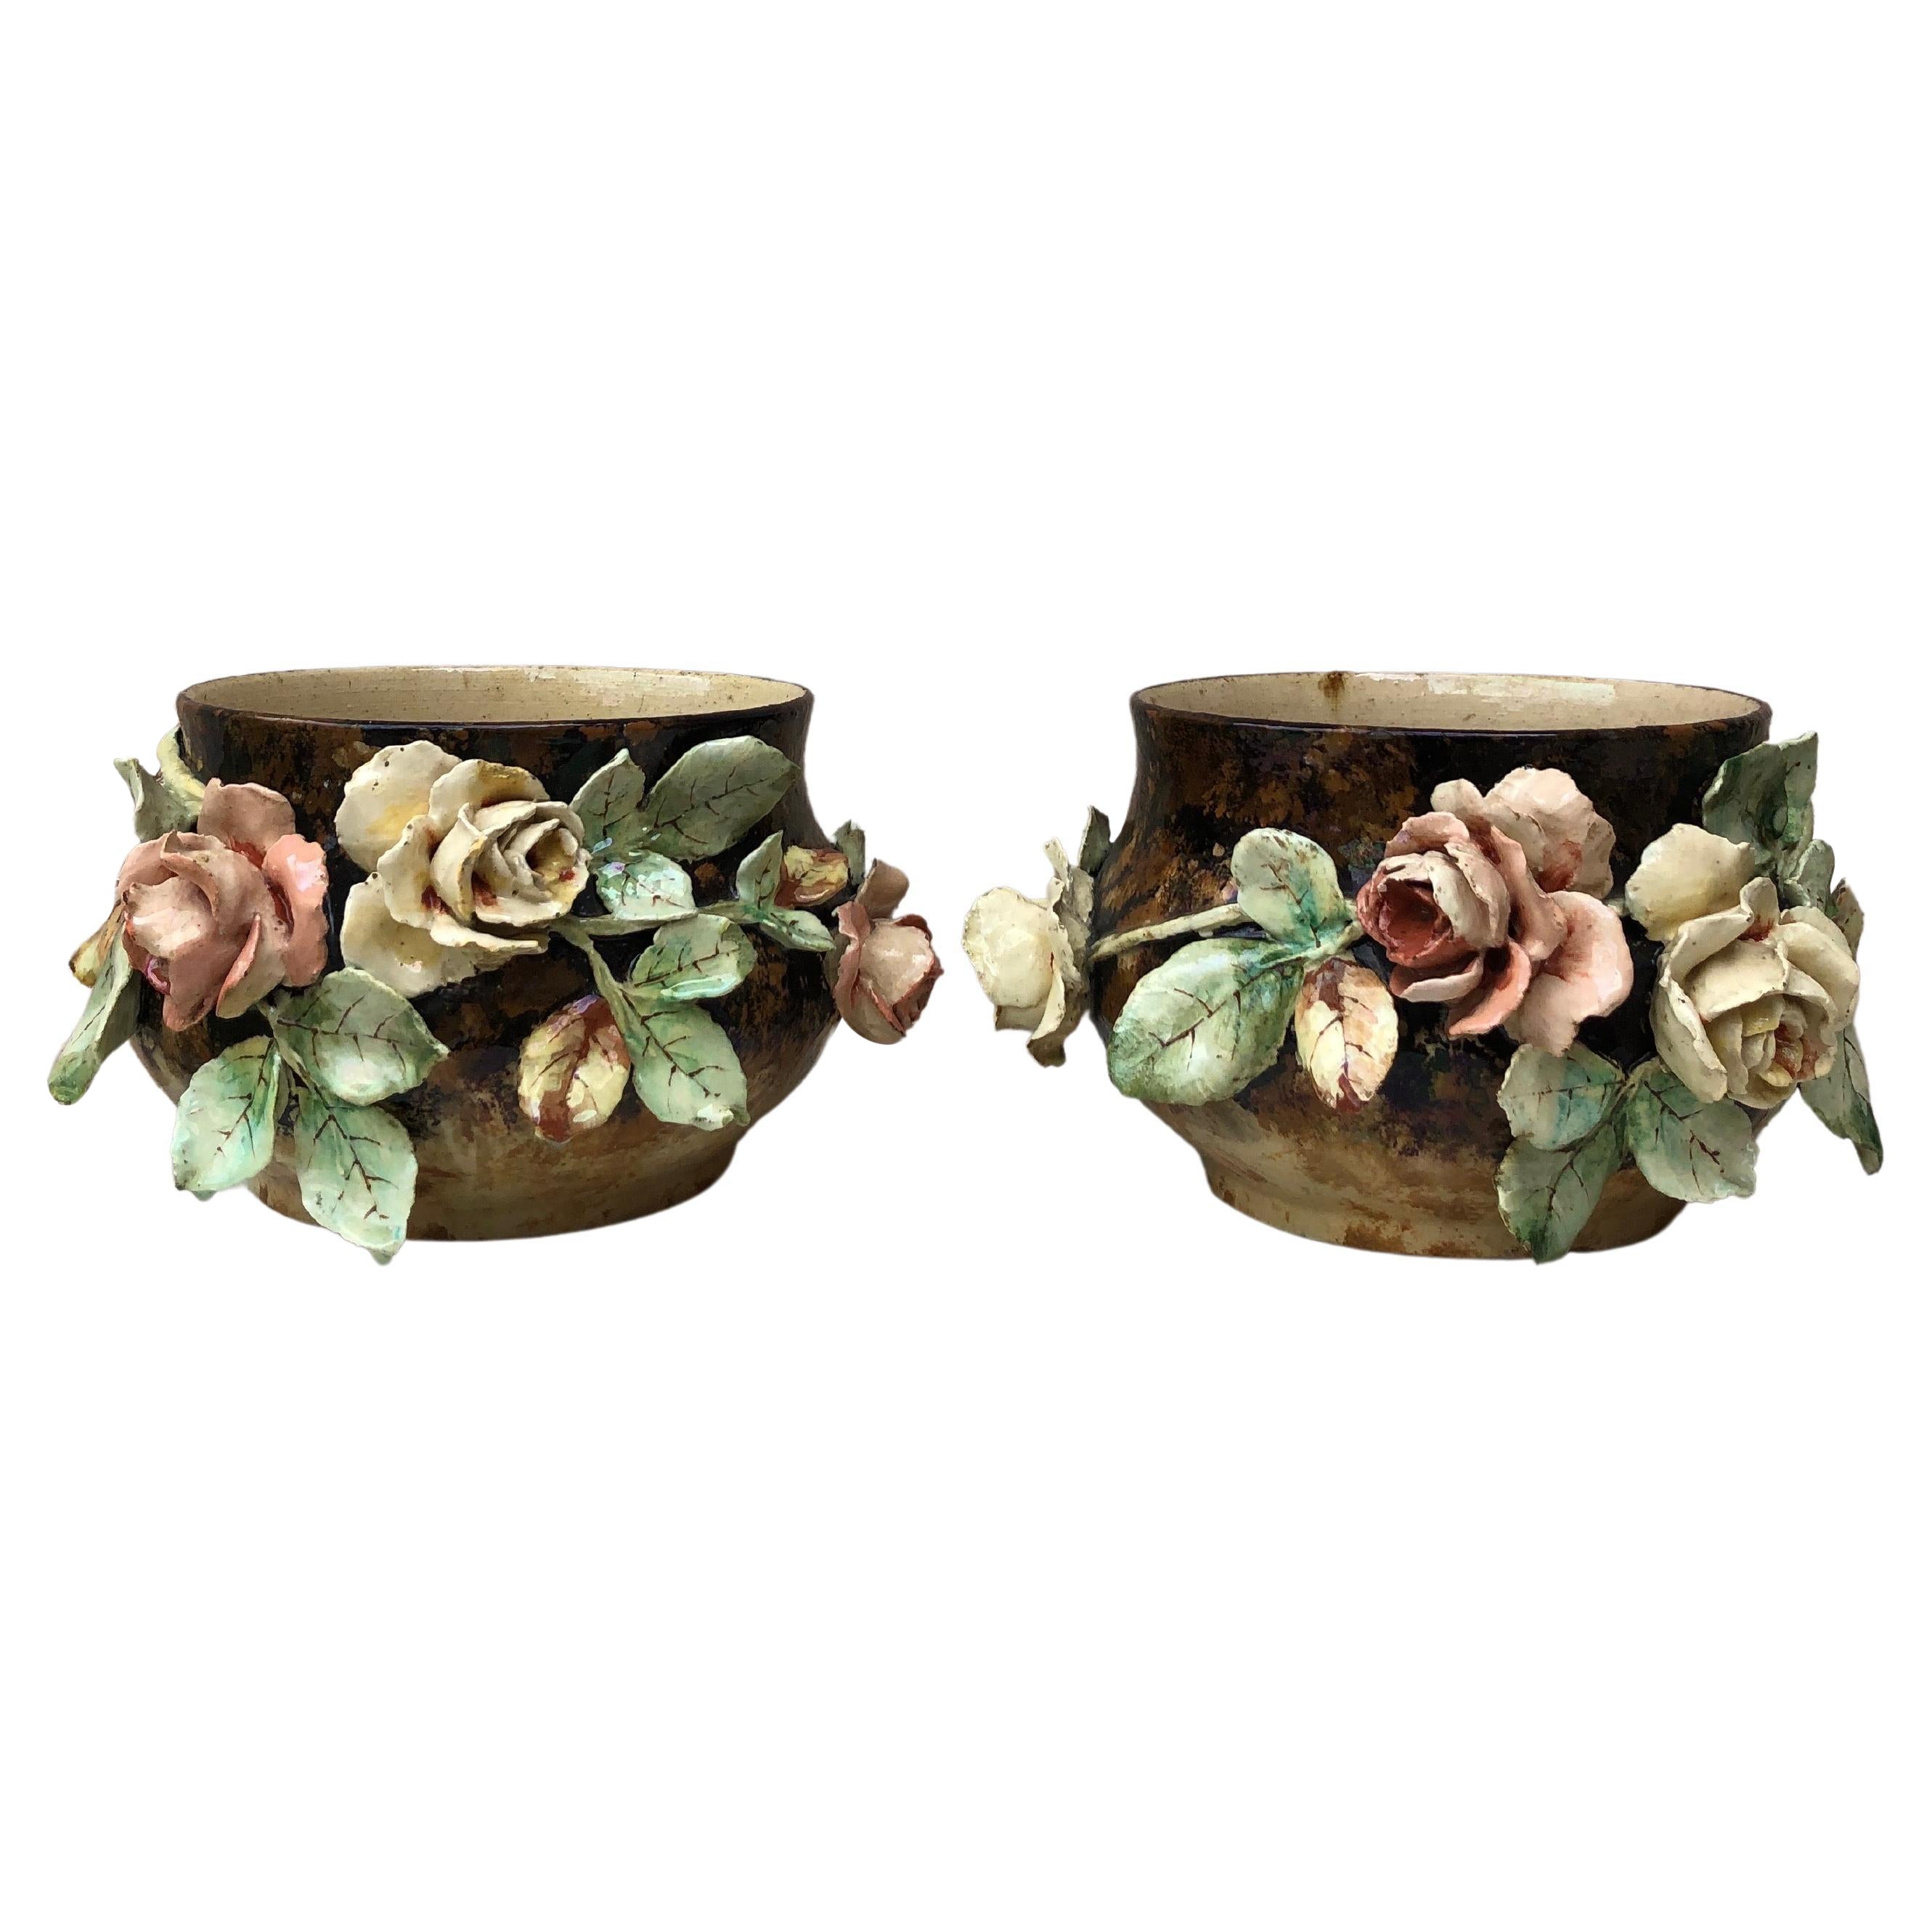 French pair of Majolica jardinières with flowers signed EG Edouard Gilles, circa 1880.
Measures: Height 7 inches, diameter 11.5 inches.